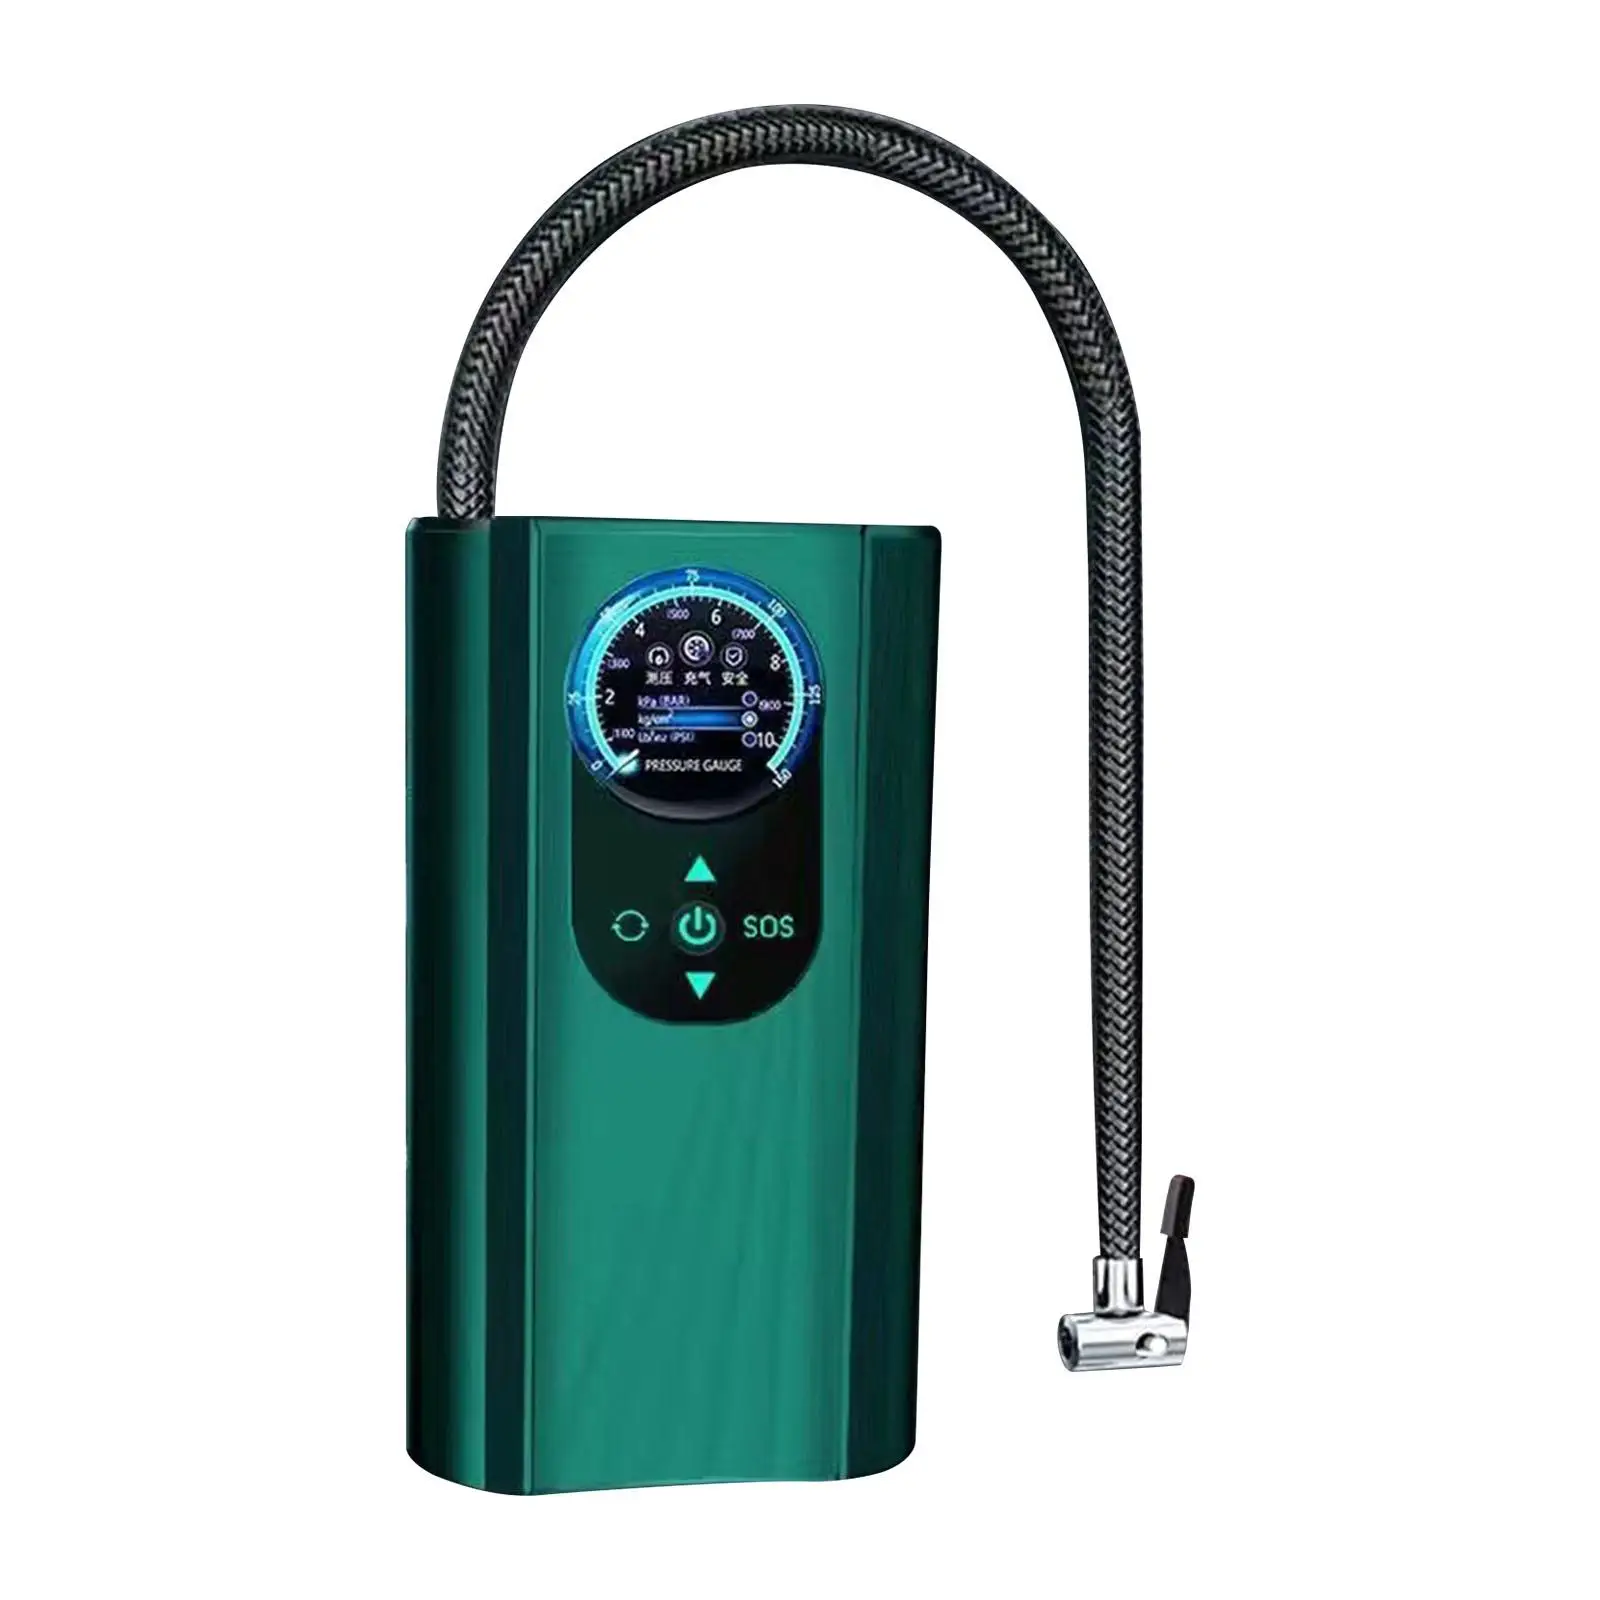 Portable Air Compressor Handheld Mini with Pressure Gauge Compact Electric Tire Pump for Bicycle Bike Car Ball Motorcycle